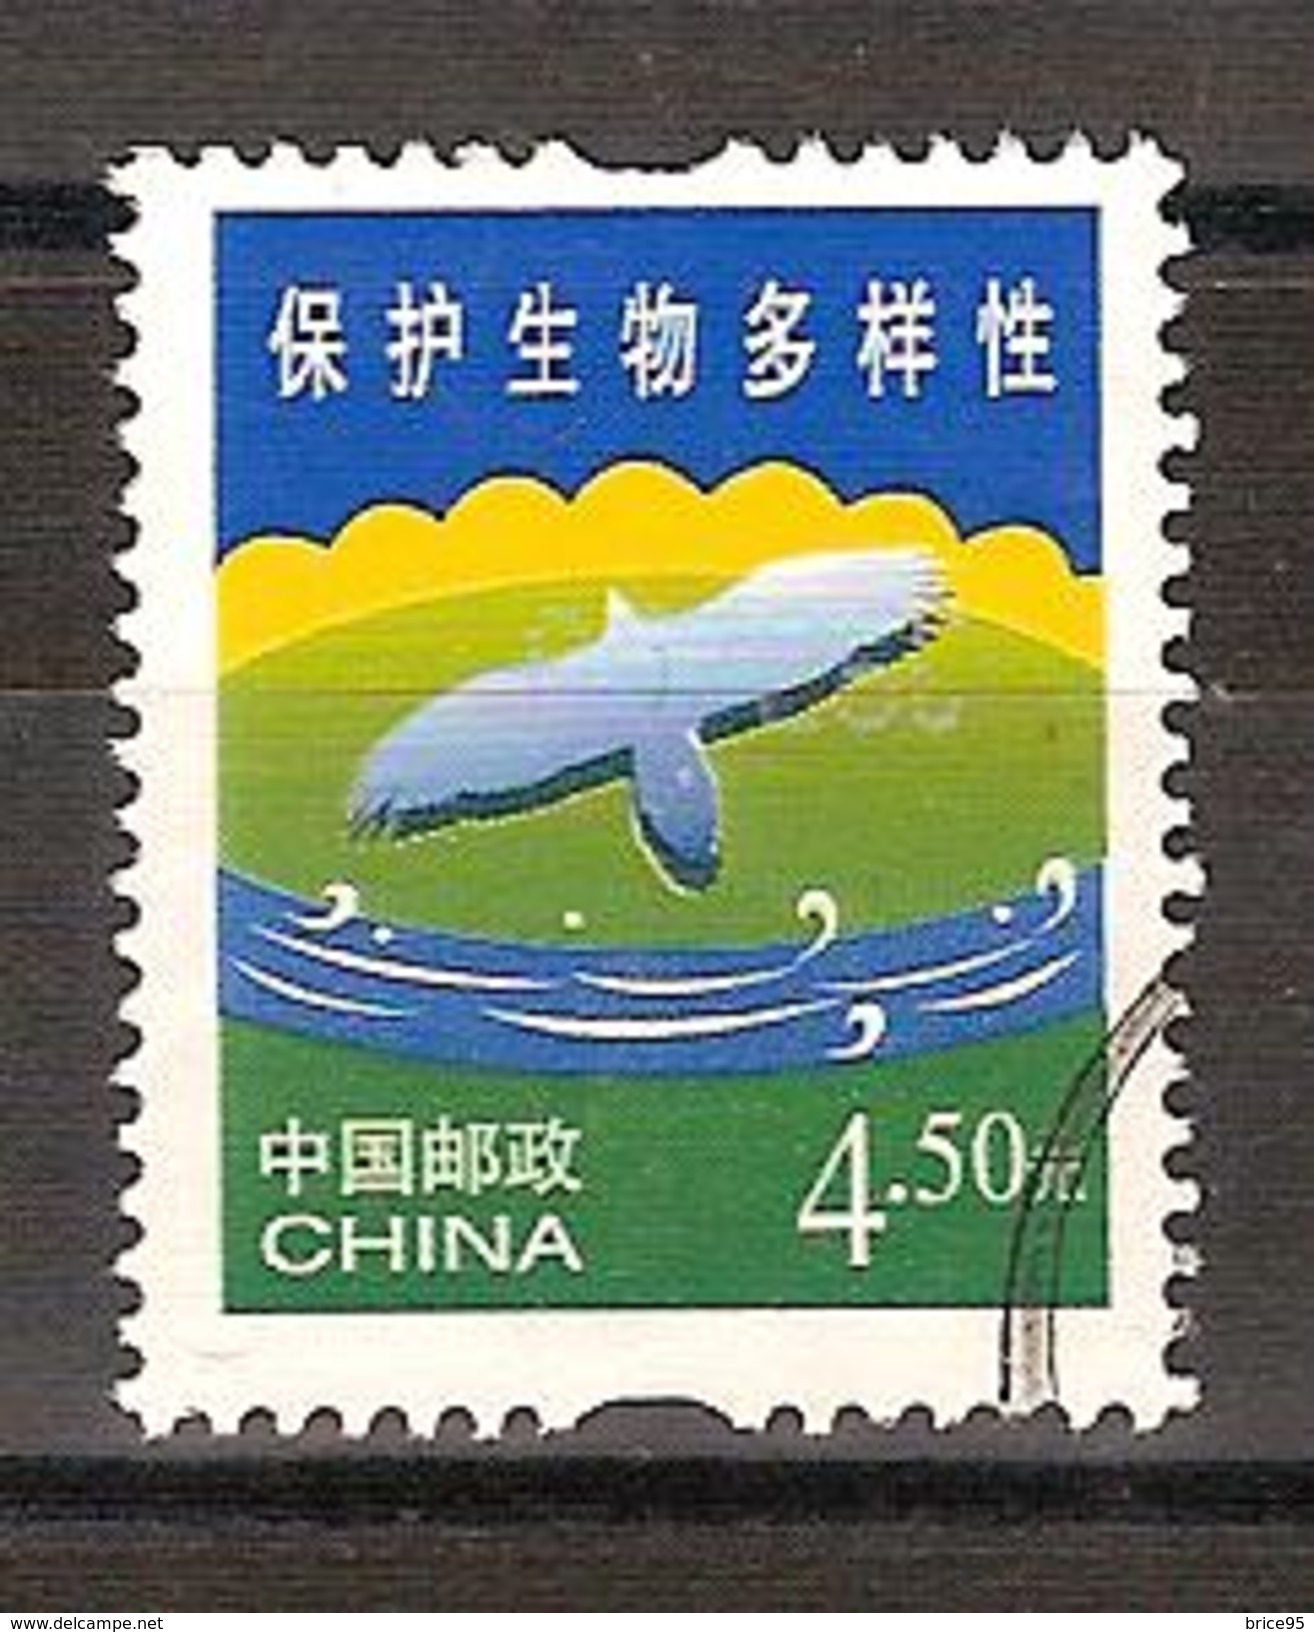 Chine 2004 N° 4144 Oblitéré - Used Stamps